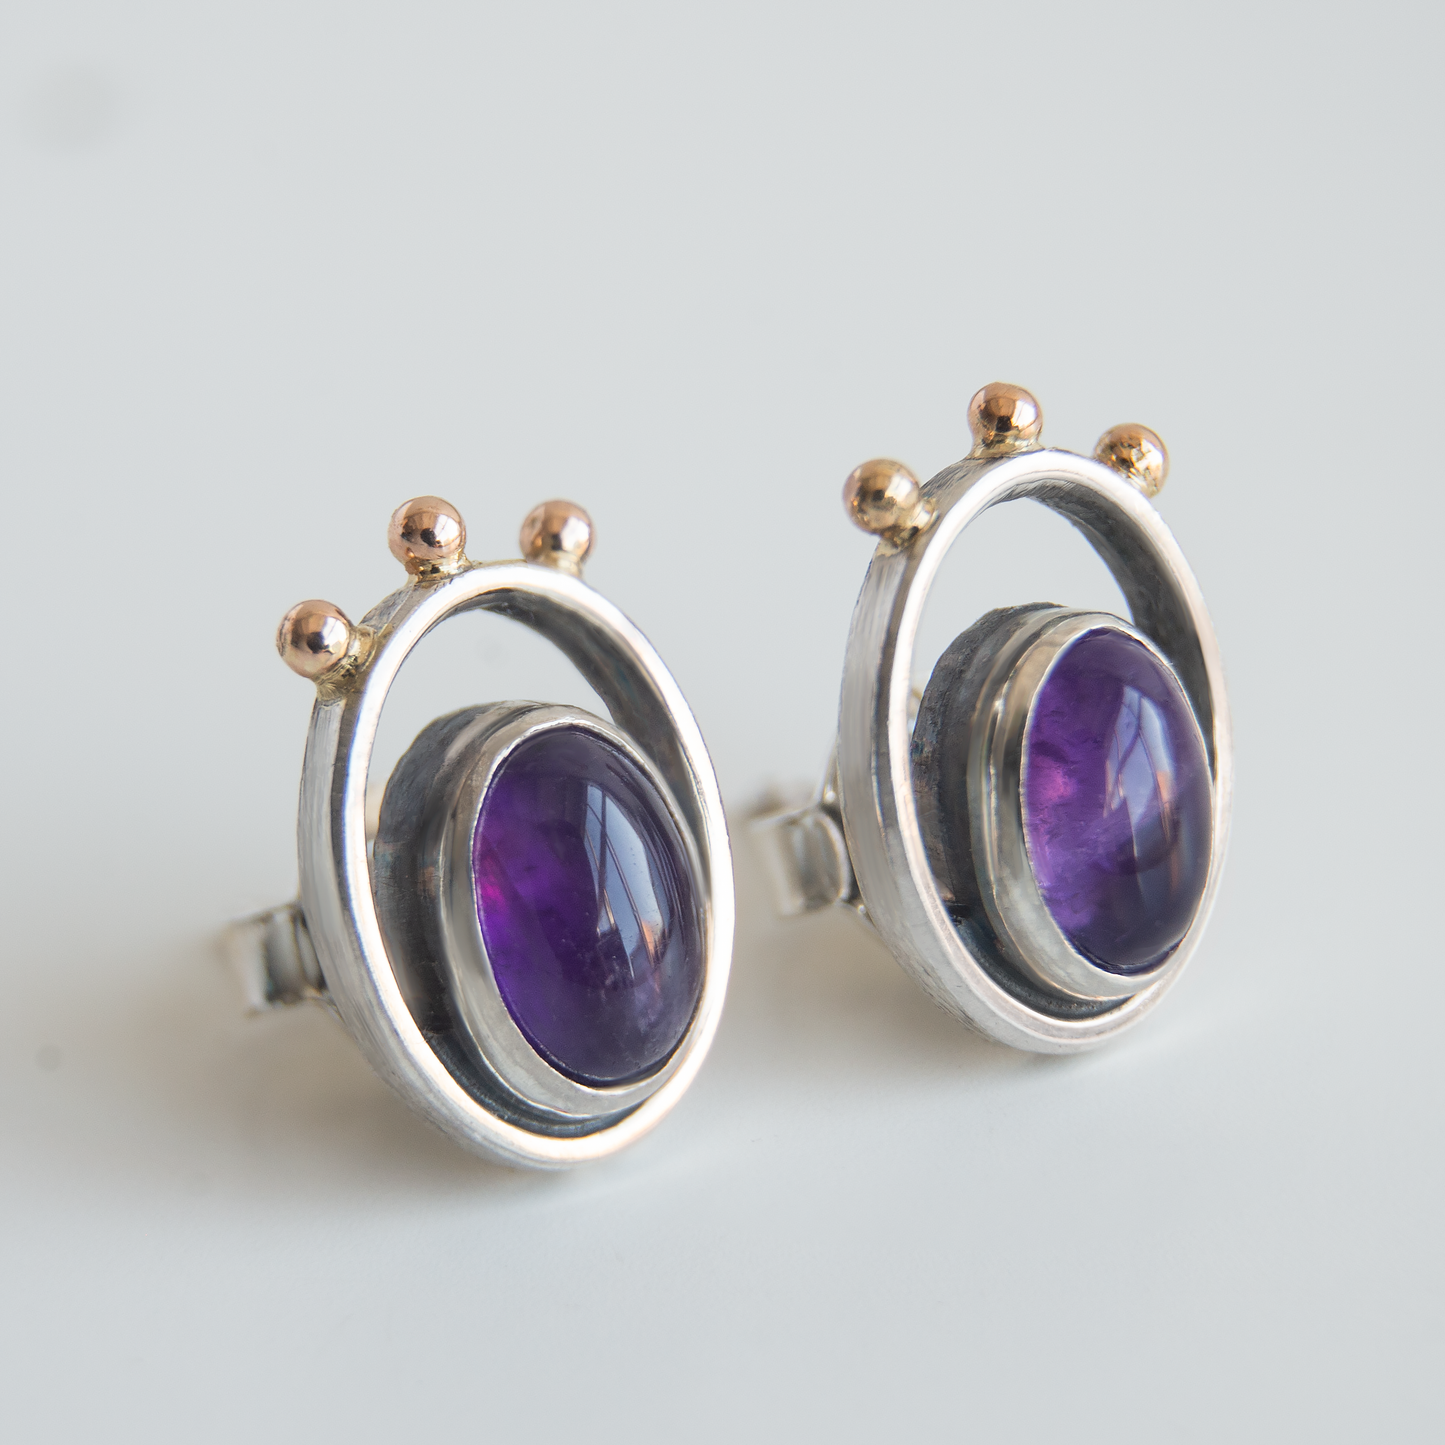 Amethyst Stone, Sterling Silver Minimalistic Earrings With 14K Gold Beads